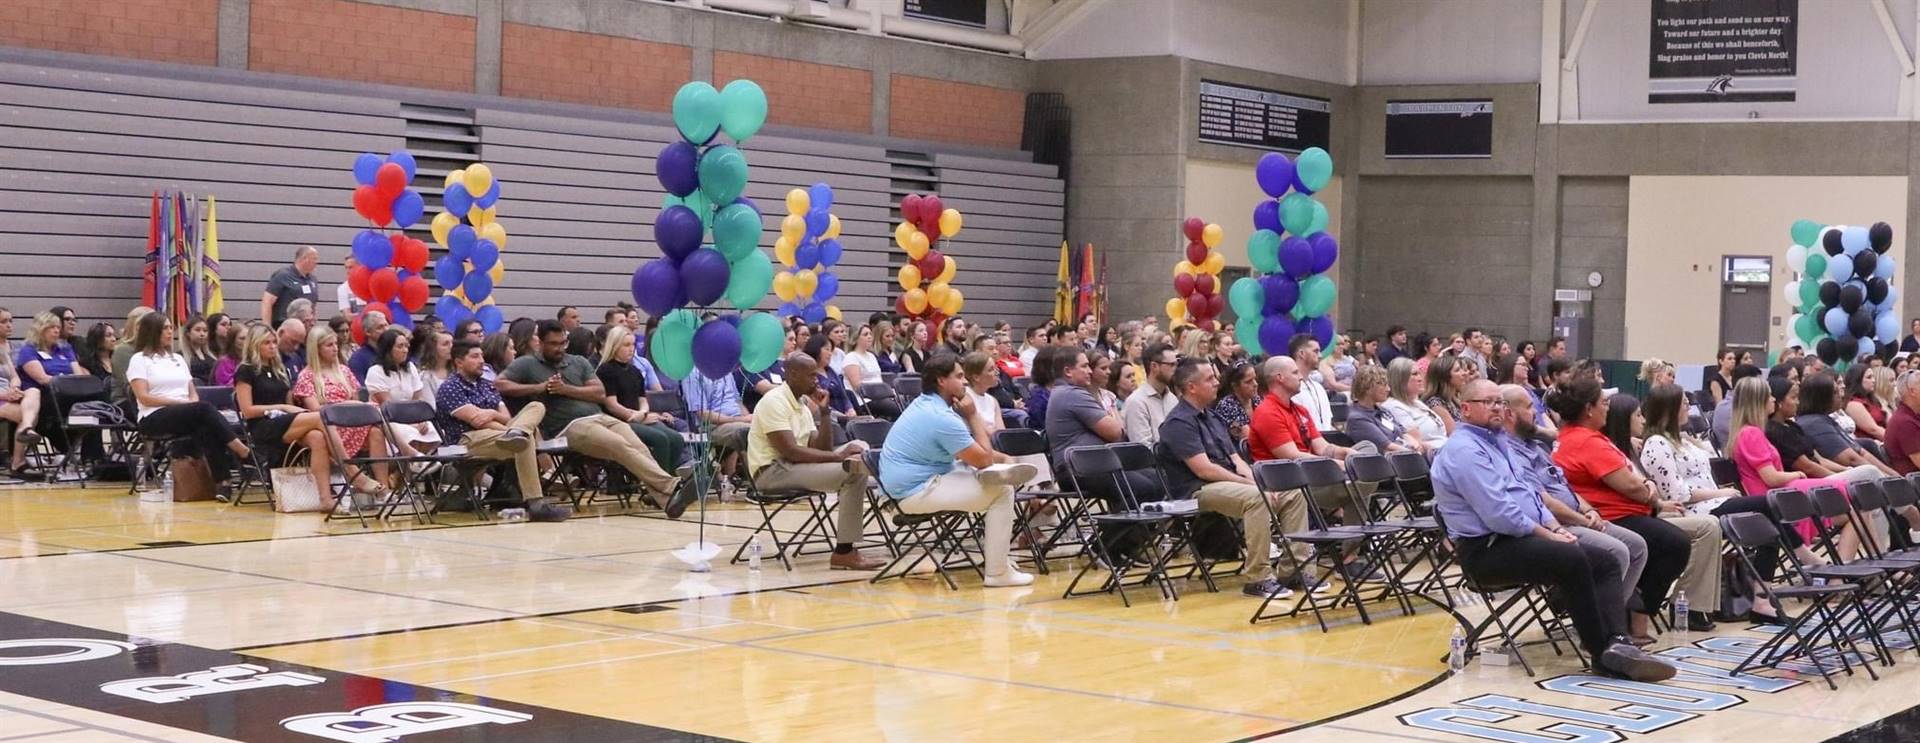 CNHS Gym with audience seating and balloon pillars